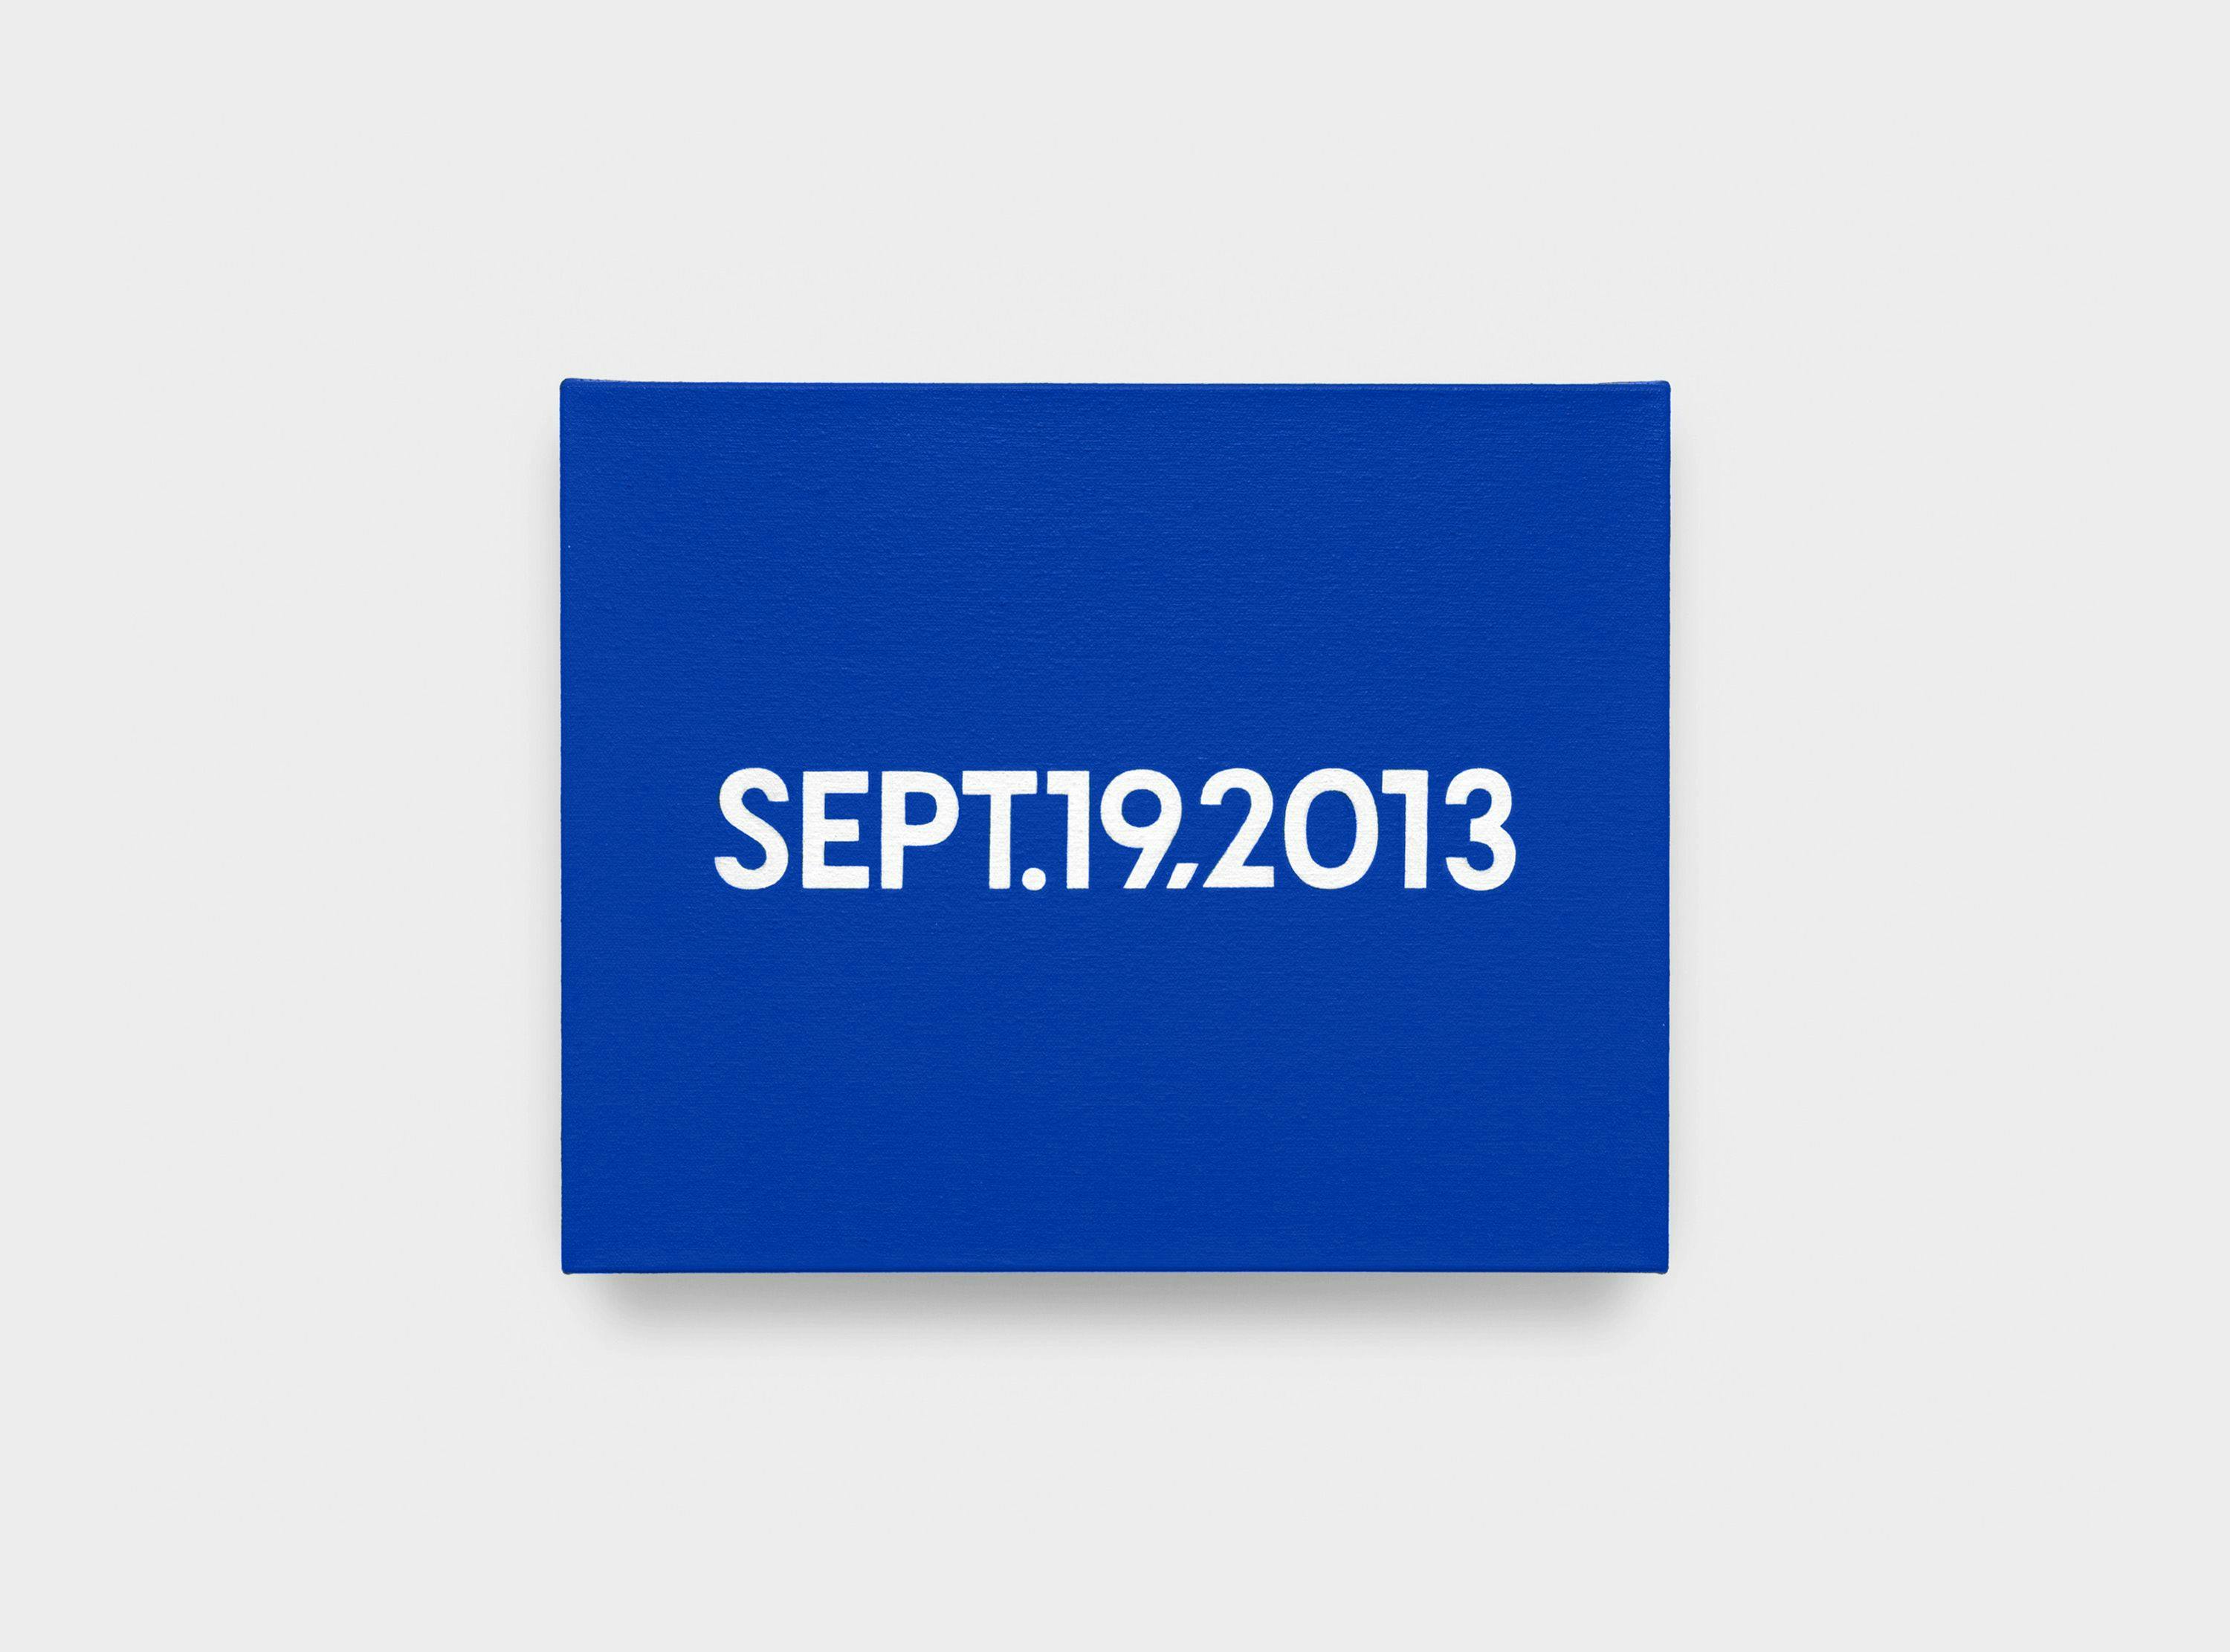 A painting by On Kawara, titled SEPT. 19, 2013, 2013 from "Today" series, 1966 to 2013.